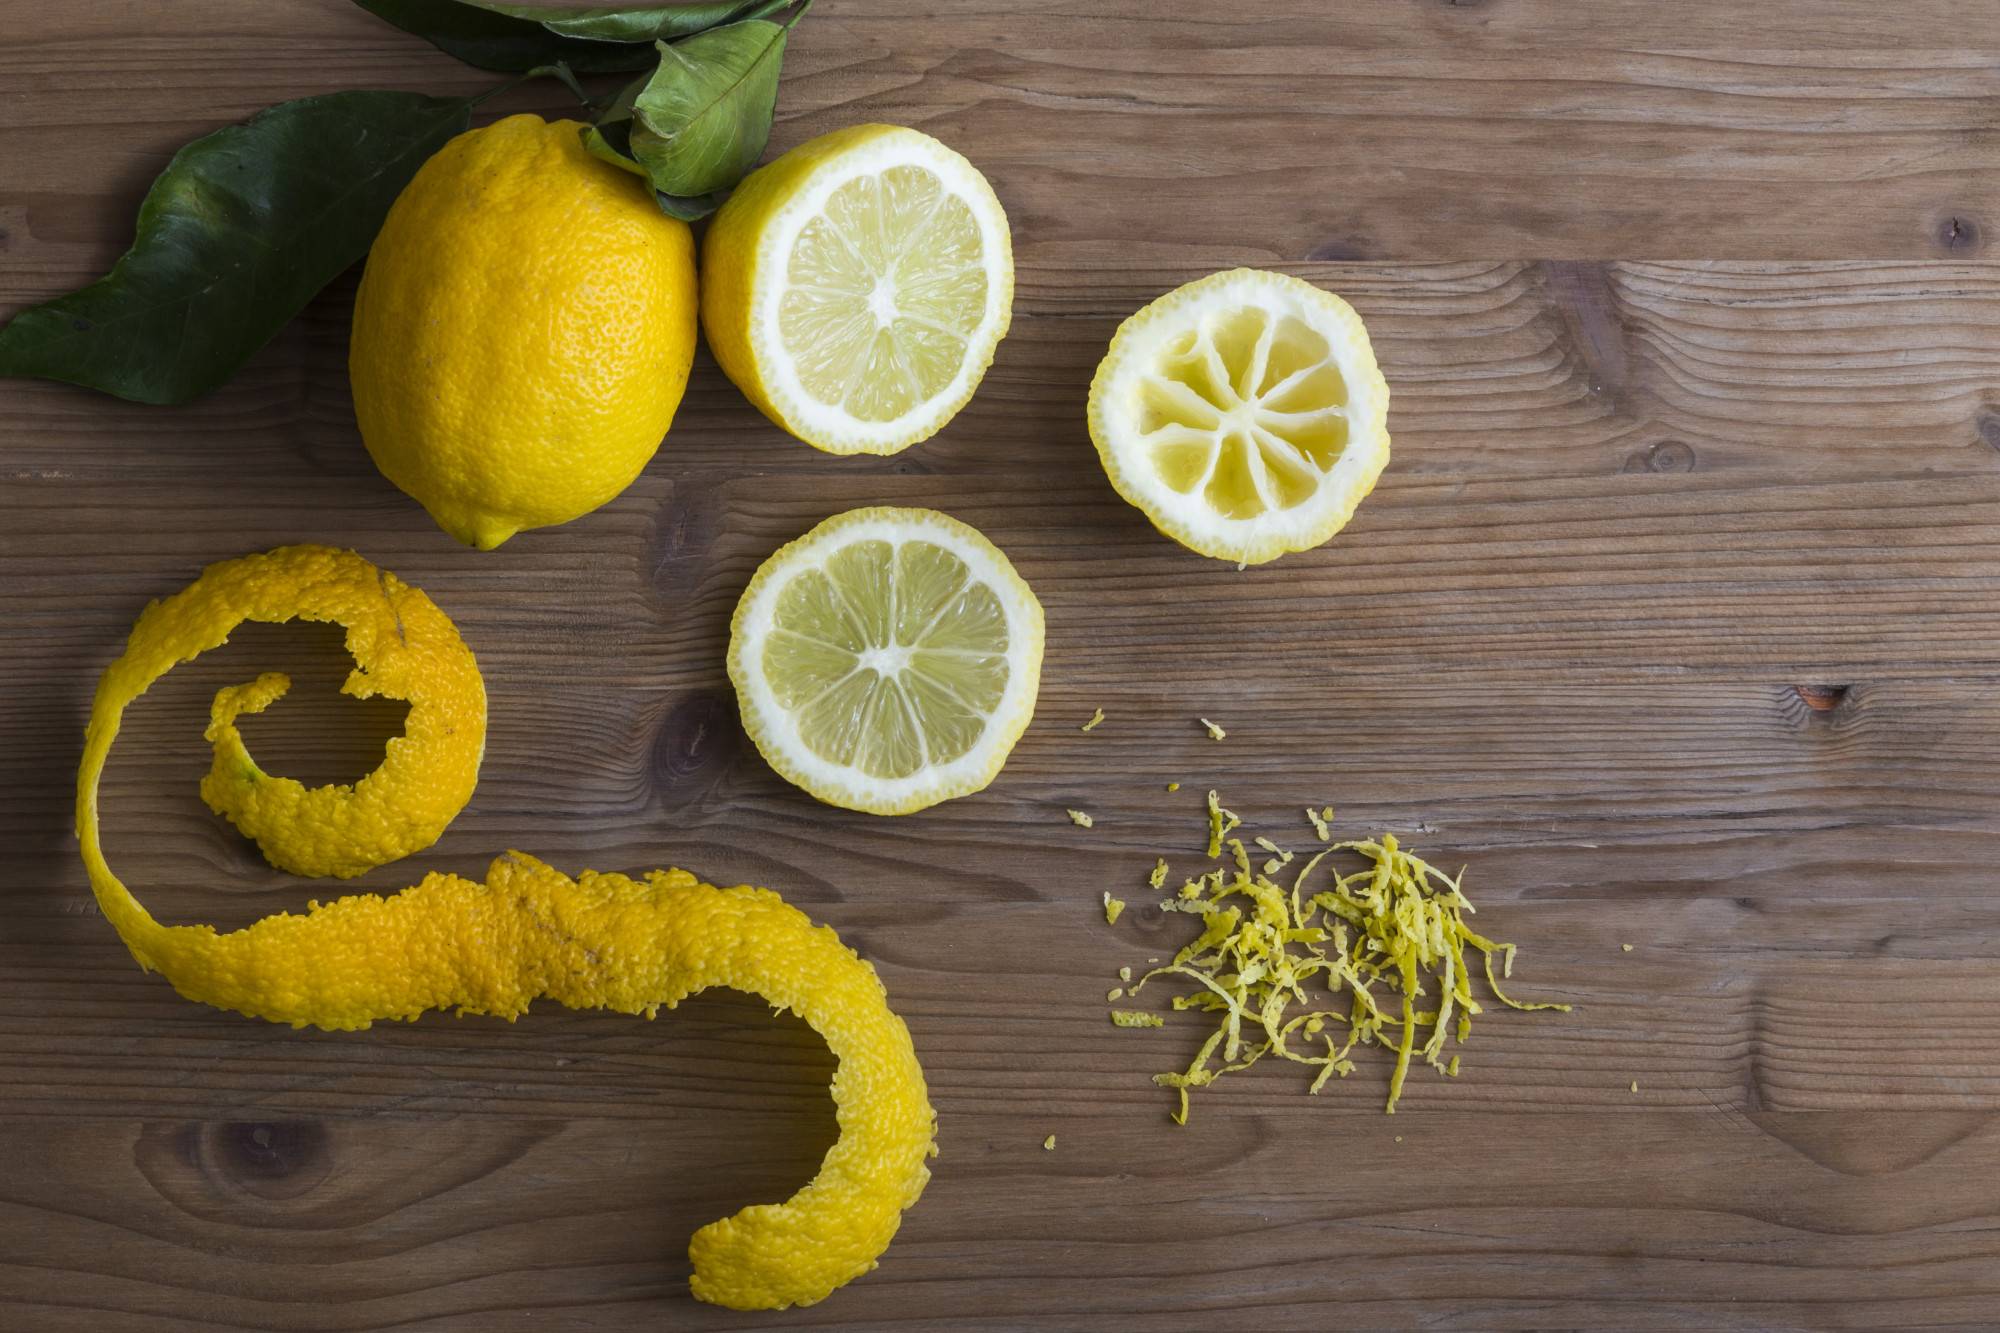 3 Clever Household Uses for the Citrus Peel